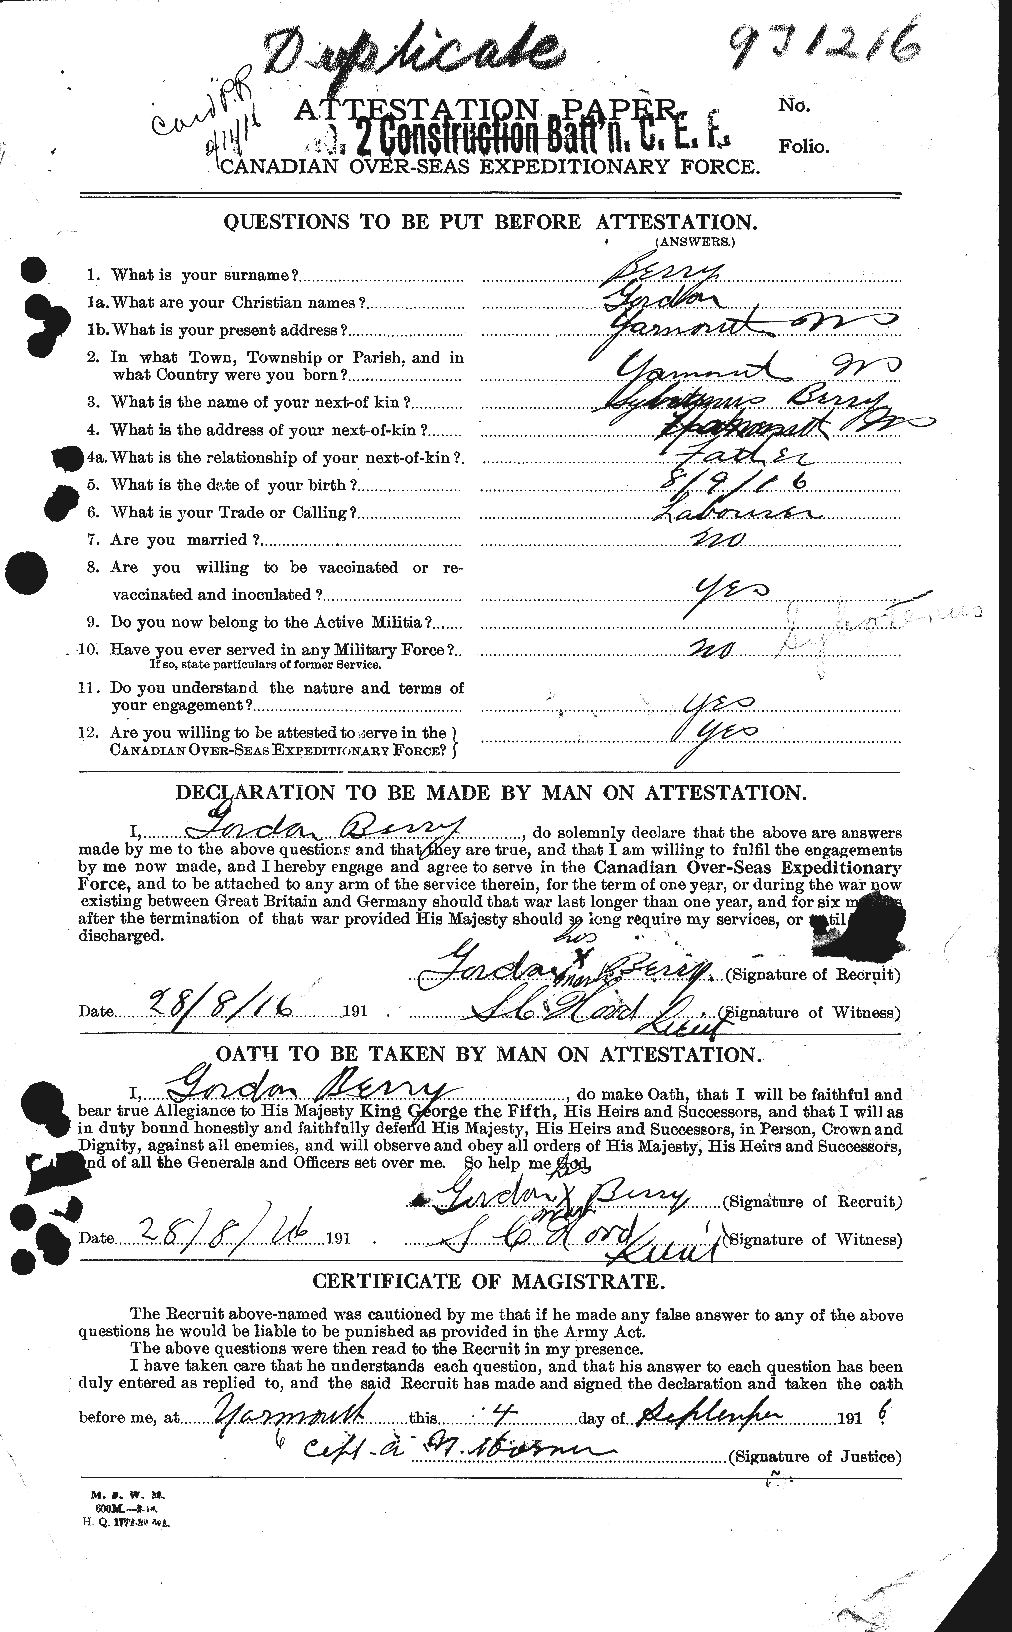 Personnel Records of the First World War - CEF 240903a